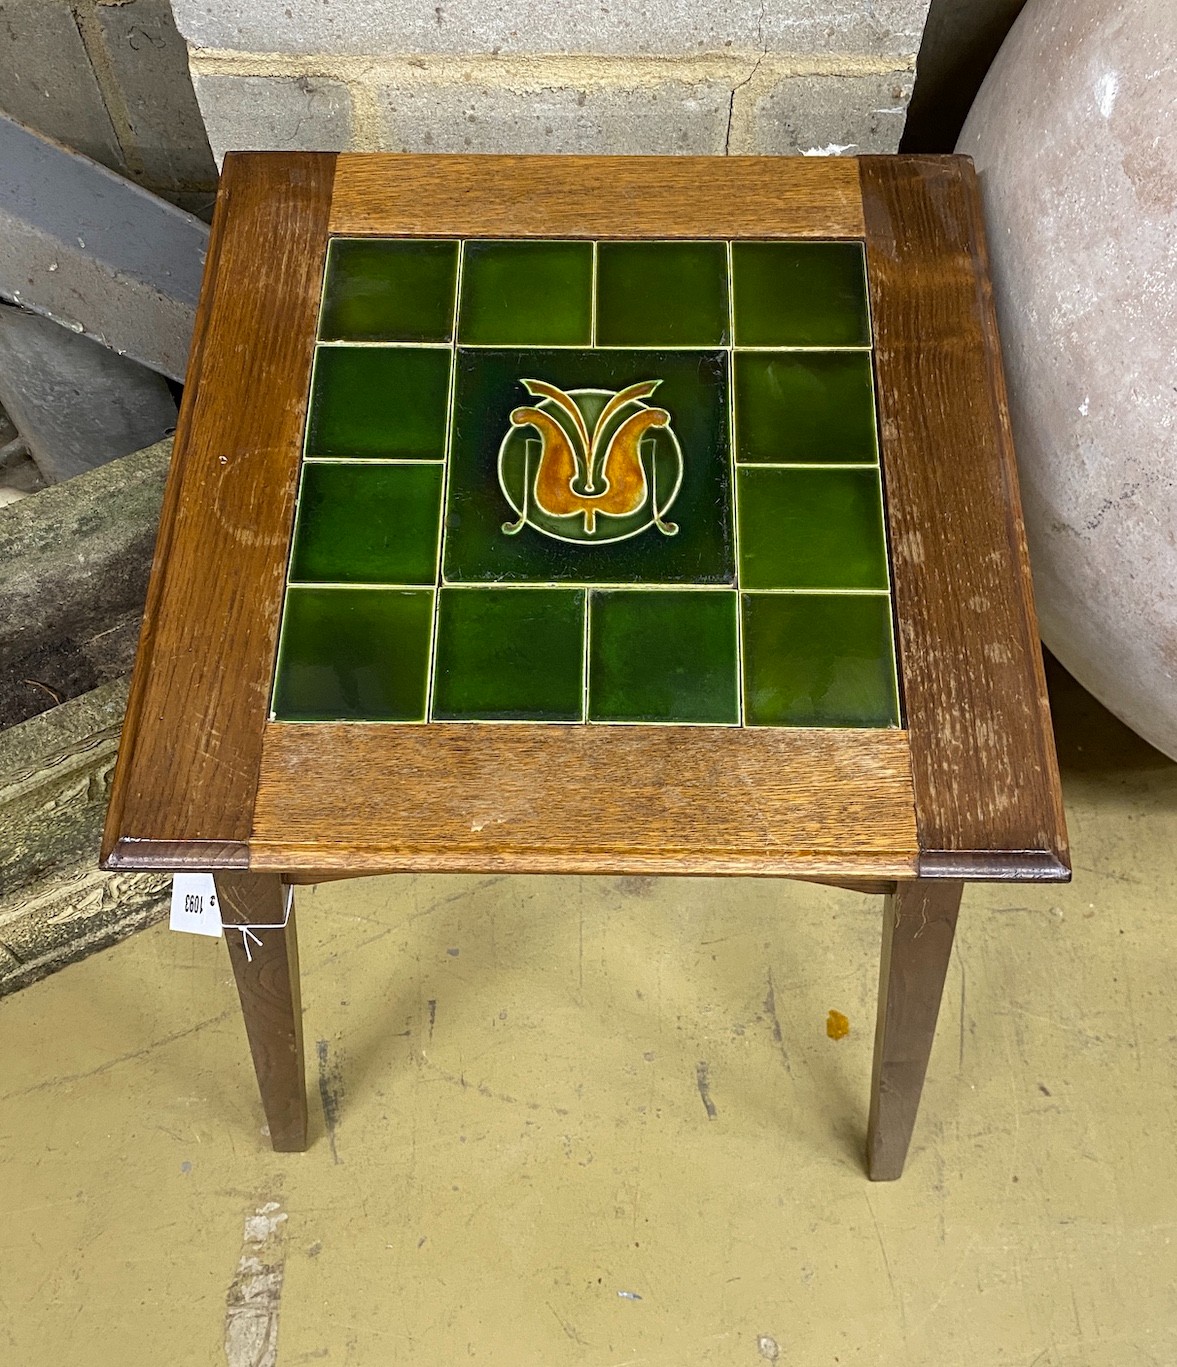 An Edwardian tile top occasional table, width 45cm, height 66cm